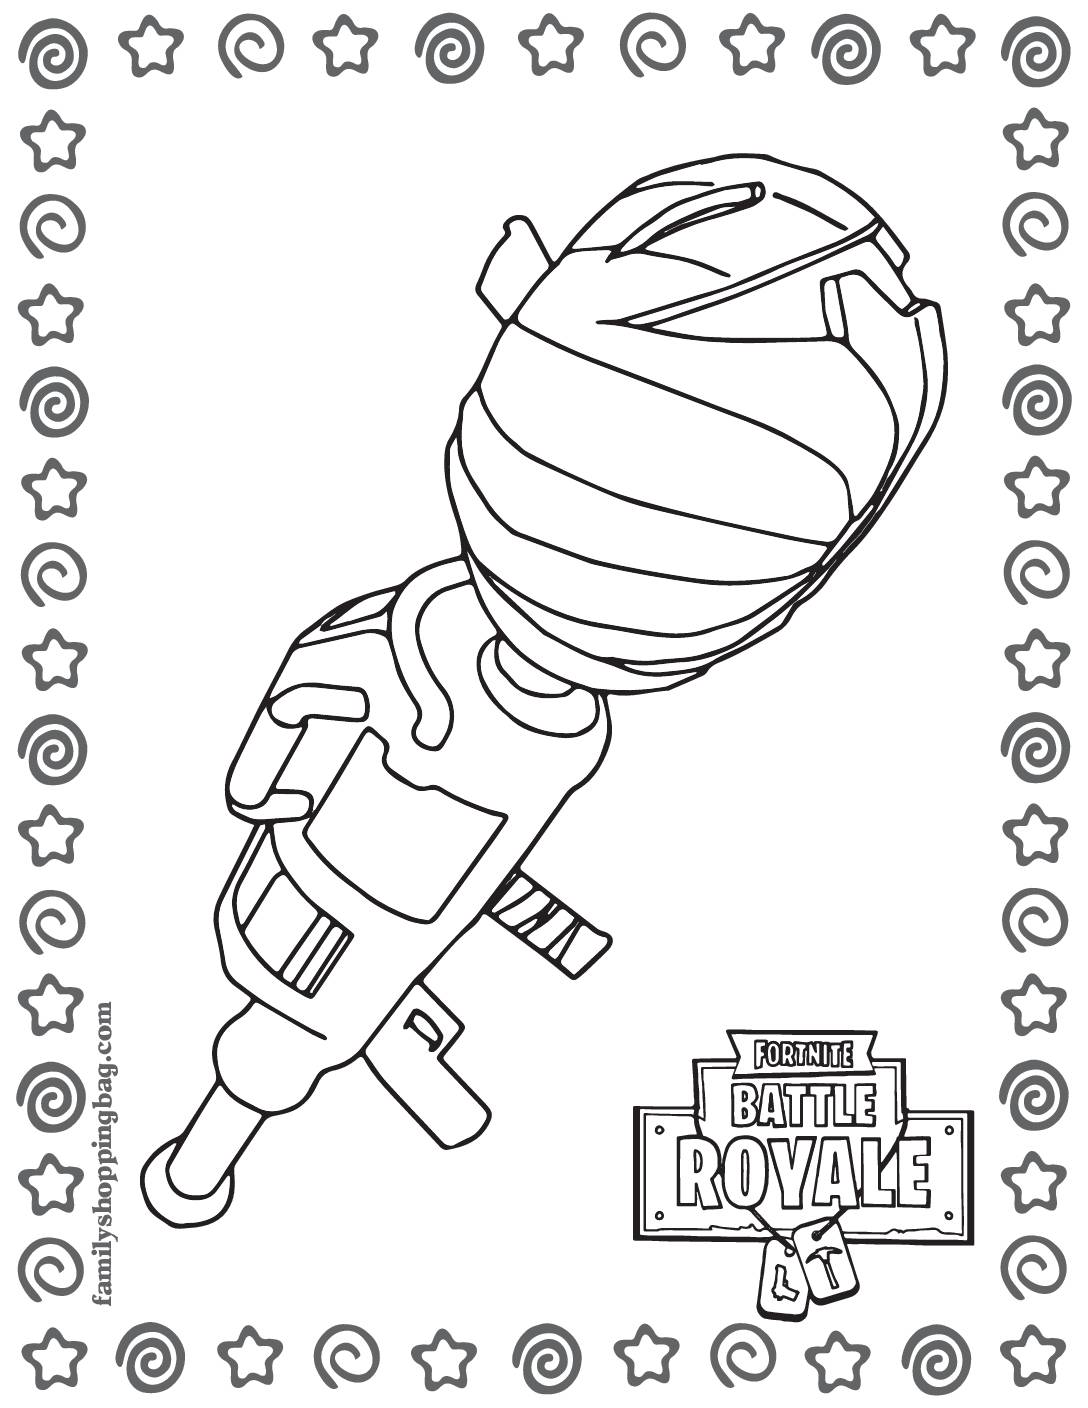 Coloring Page 2 Fortnite